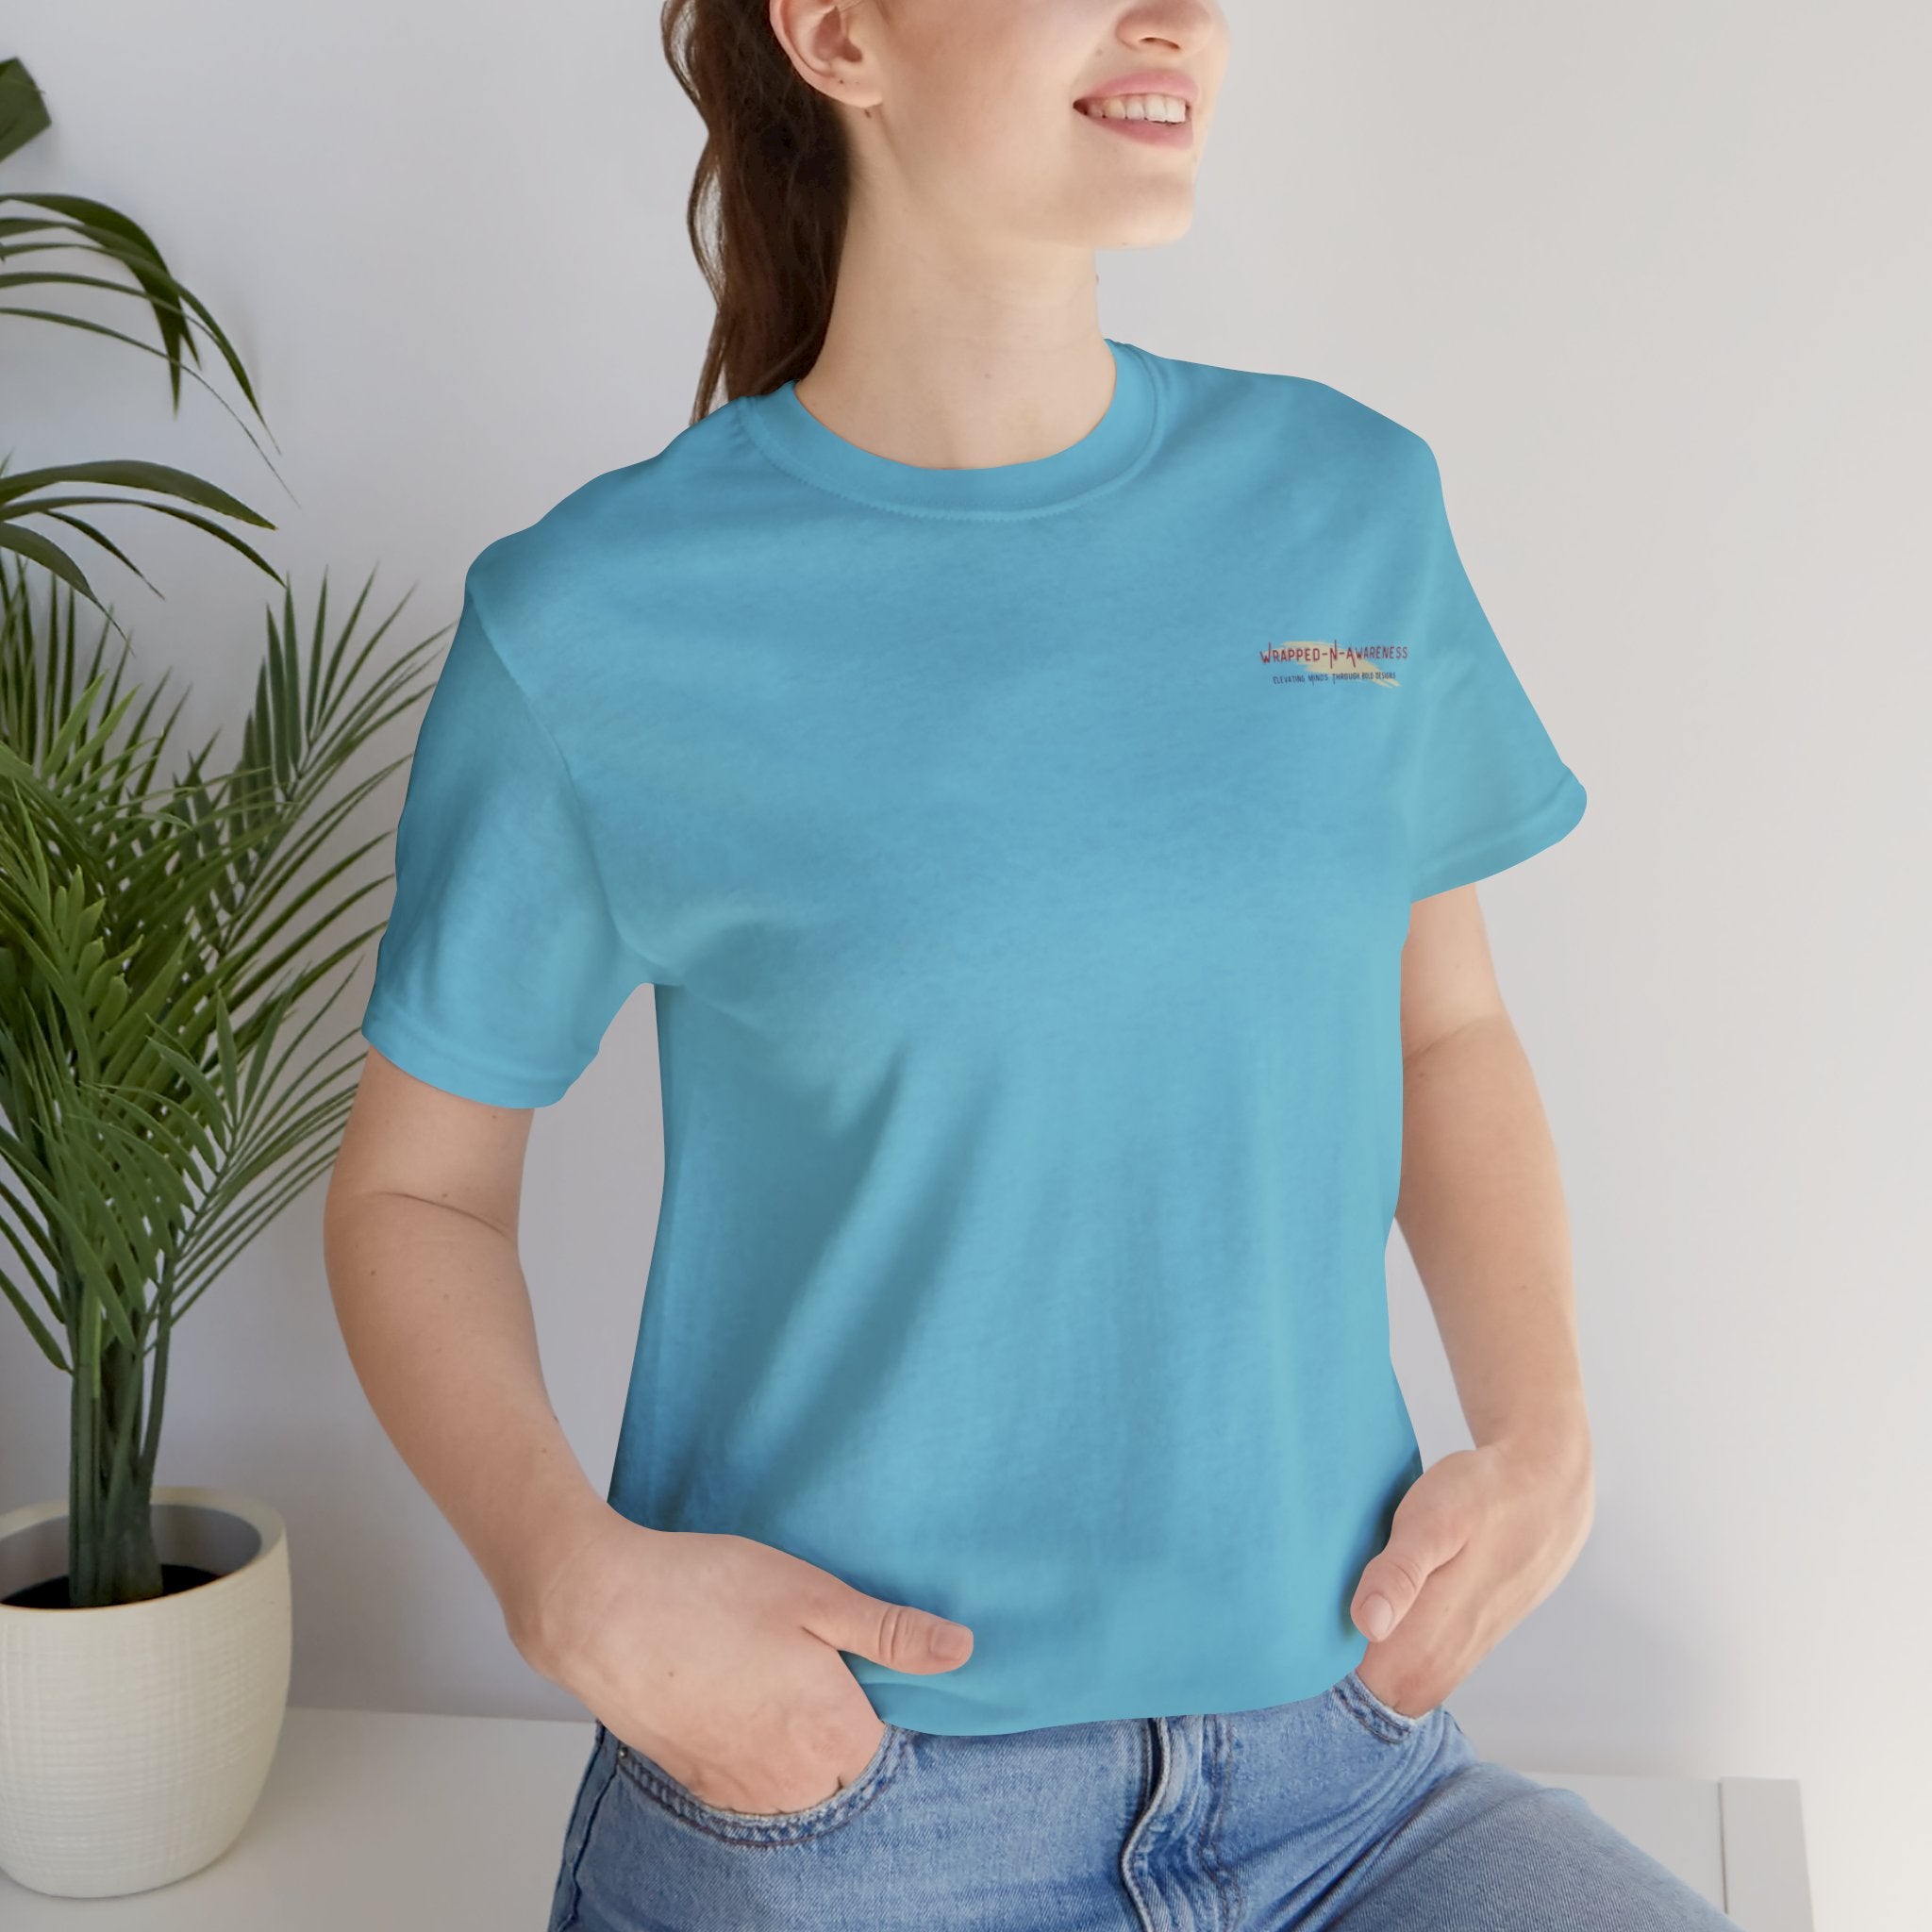 Progress Over Perfection Tee - Bella+Canvas 3001 Yellow Airlume Cotton Bella+Canvas 3001 Crew Neckline Jersey Short Sleeve Lightweight Fabric Mental Health Support Retail Fit Tear-away Label Tee Unisex Tee T-Shirt 3715786844073522497_2048 Printify